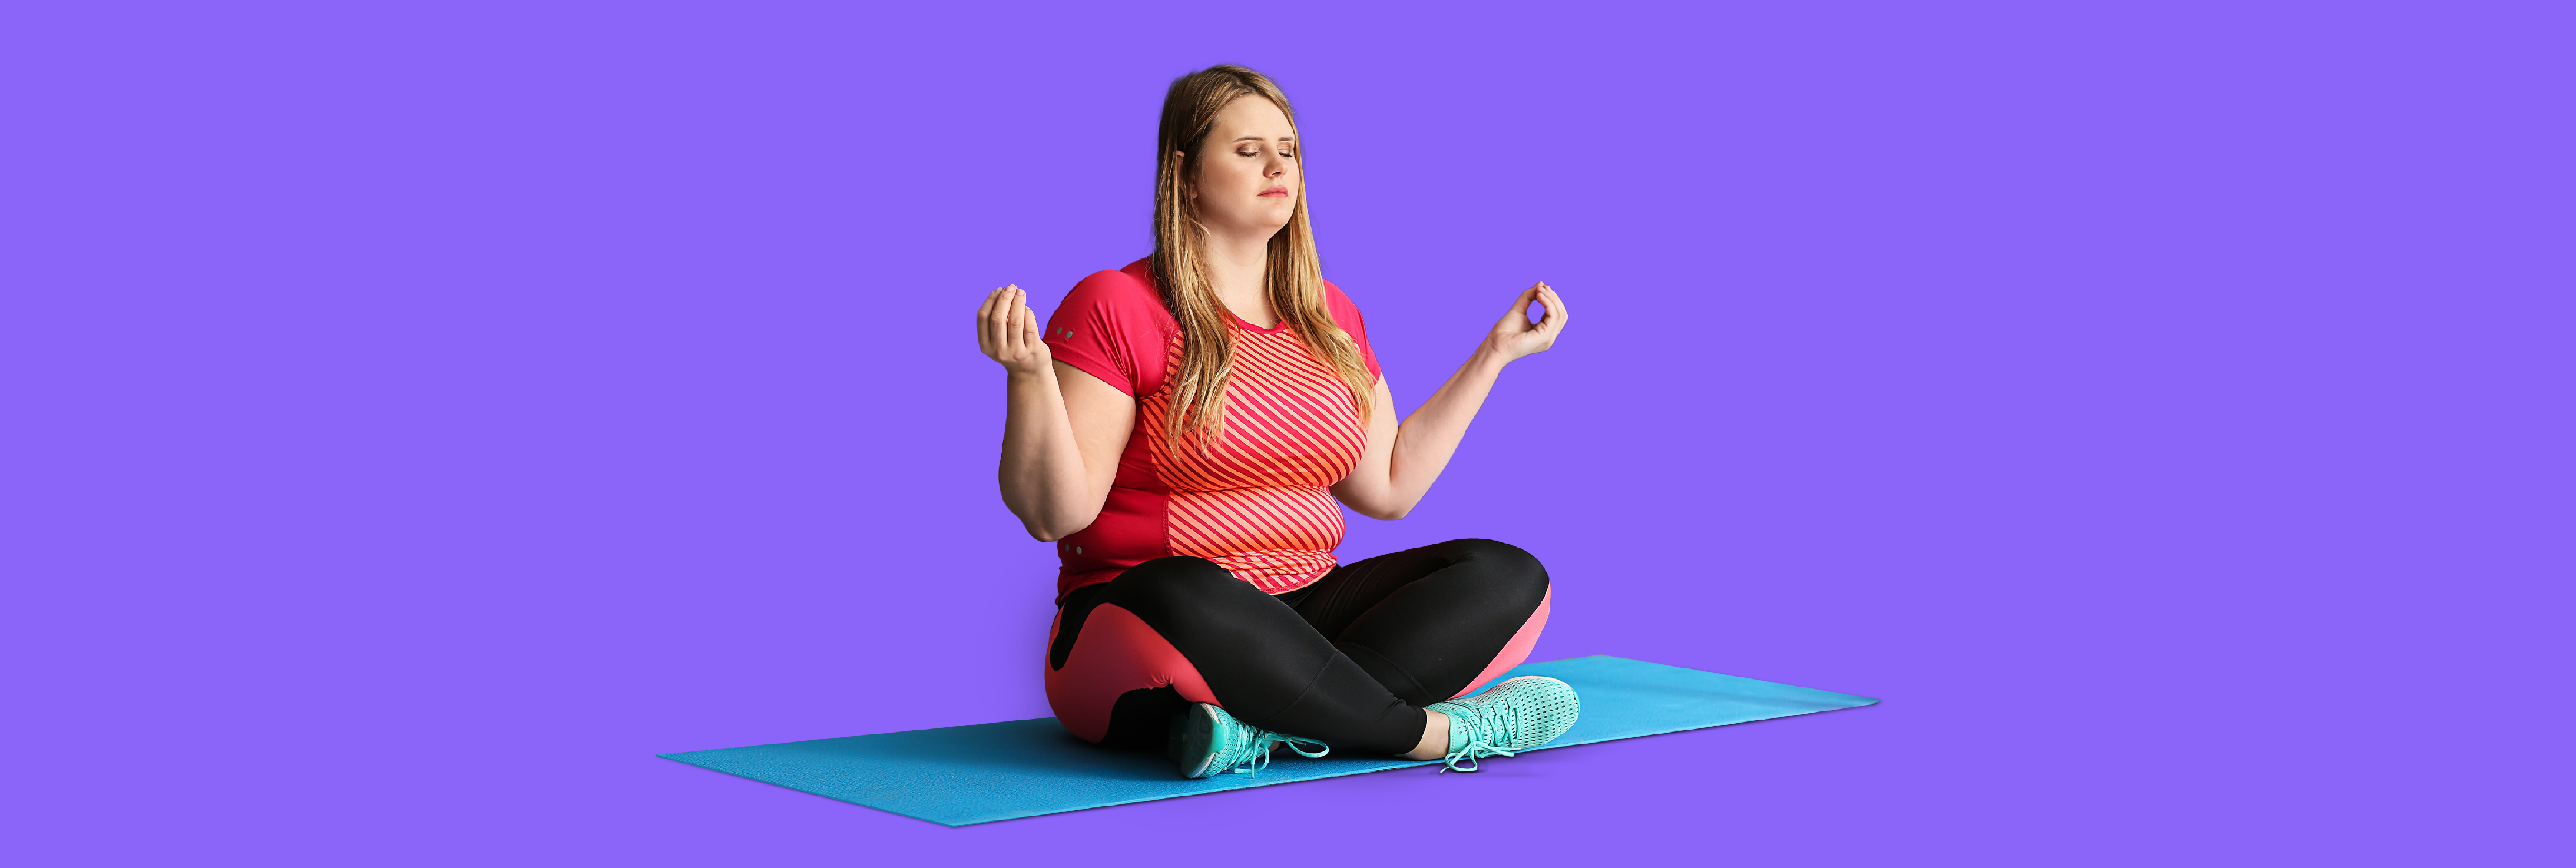 meditation for weight loss